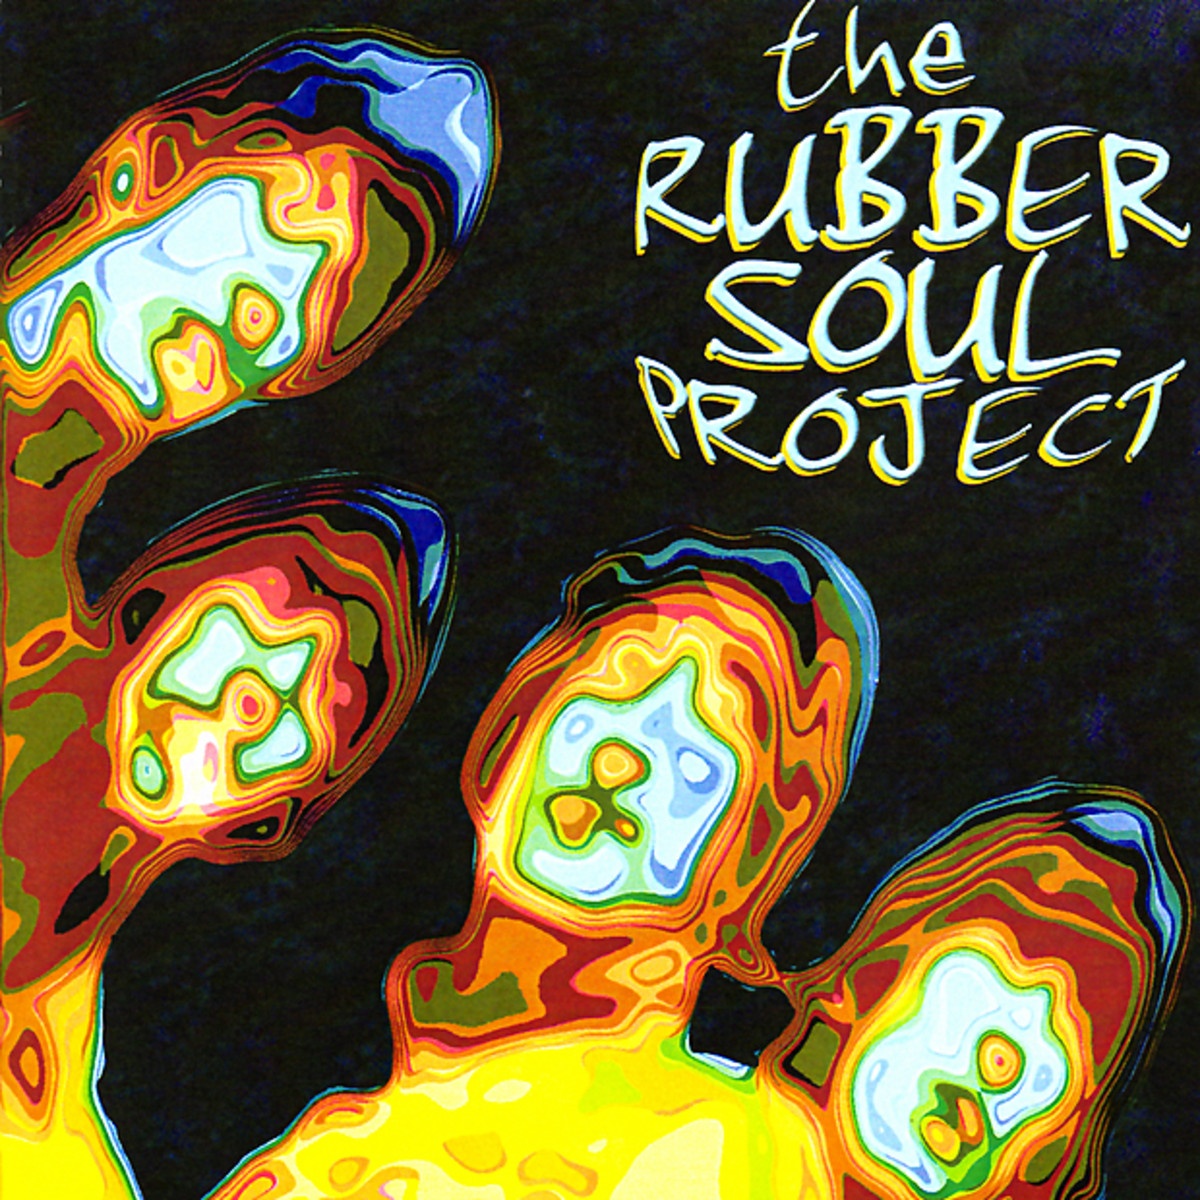 The Rubber Soul Project